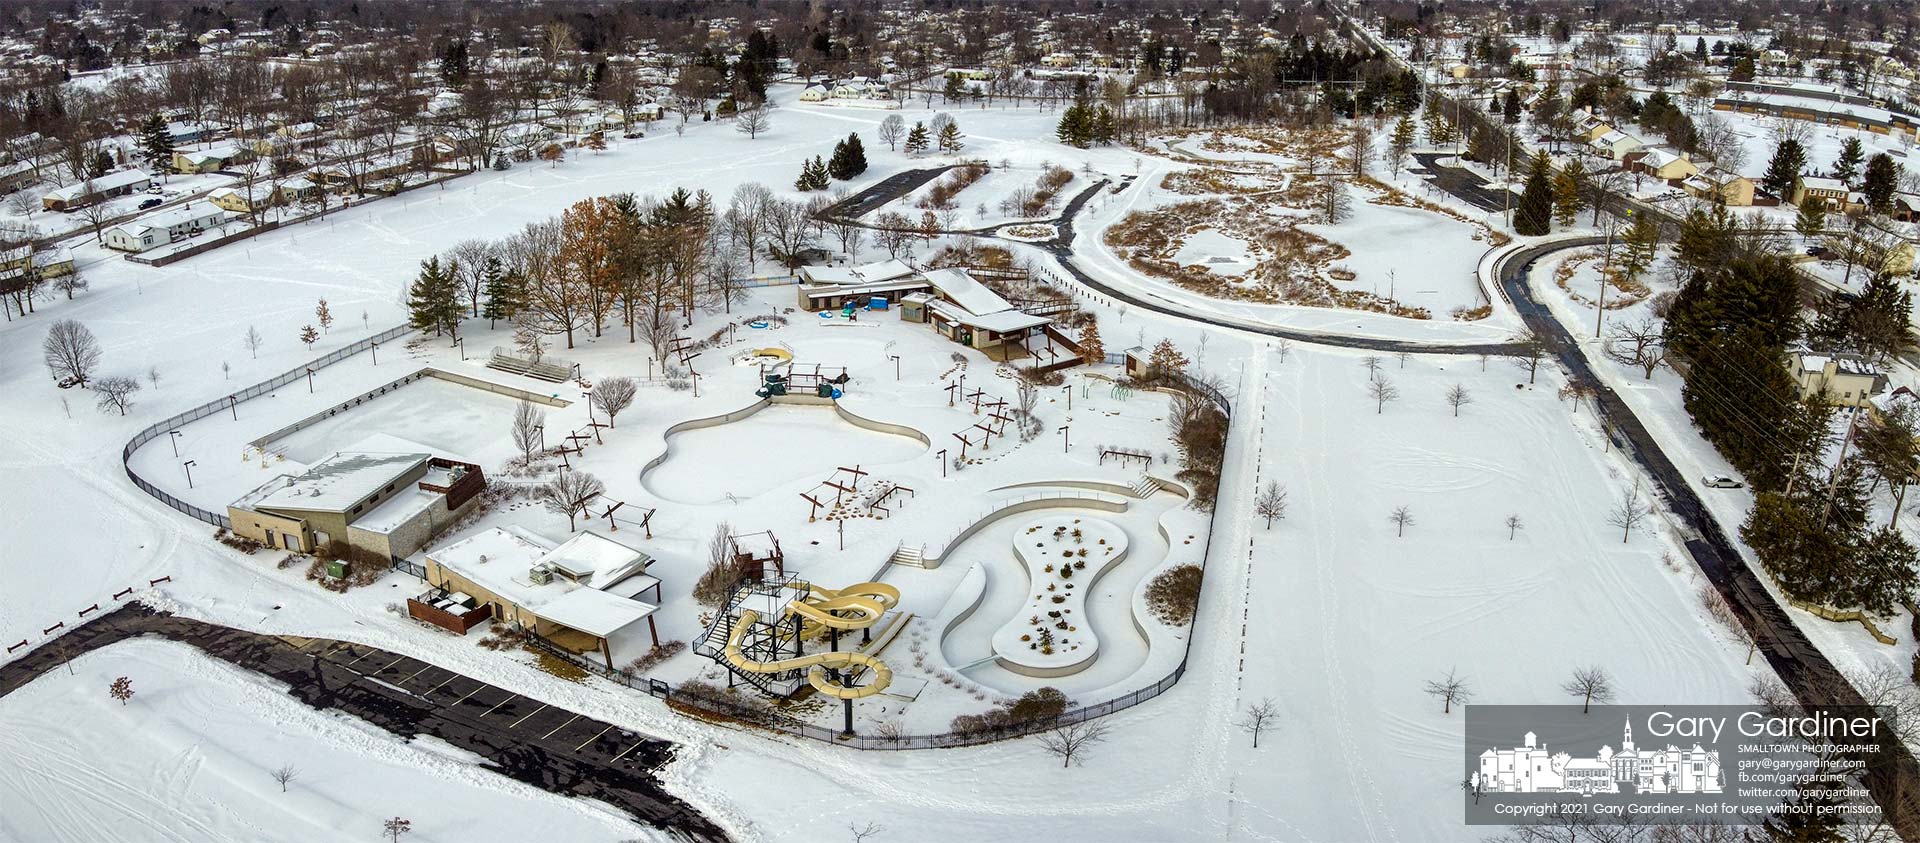 The pool and wetlands at Highlands both remain covered in a blanket of snow and ice after this week's snowstorm. My Final Photo for Feb. 17, 2021.